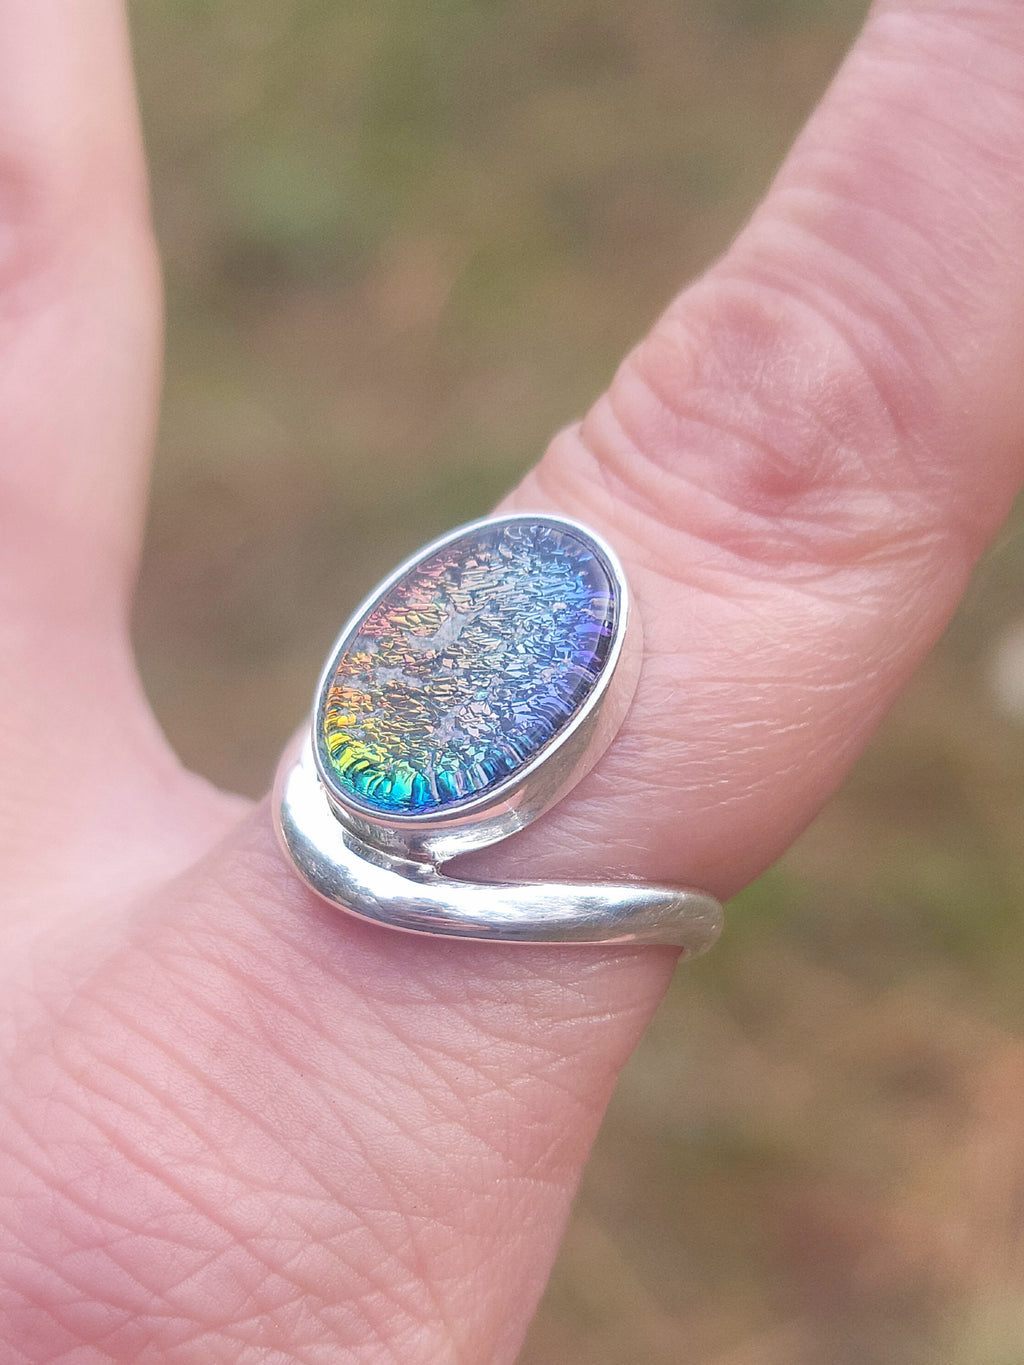 NEW Bohemian 3rd Eye Cremation Ring Ashes InFused Glass Bali Sterling Silver Urn 7,8,9